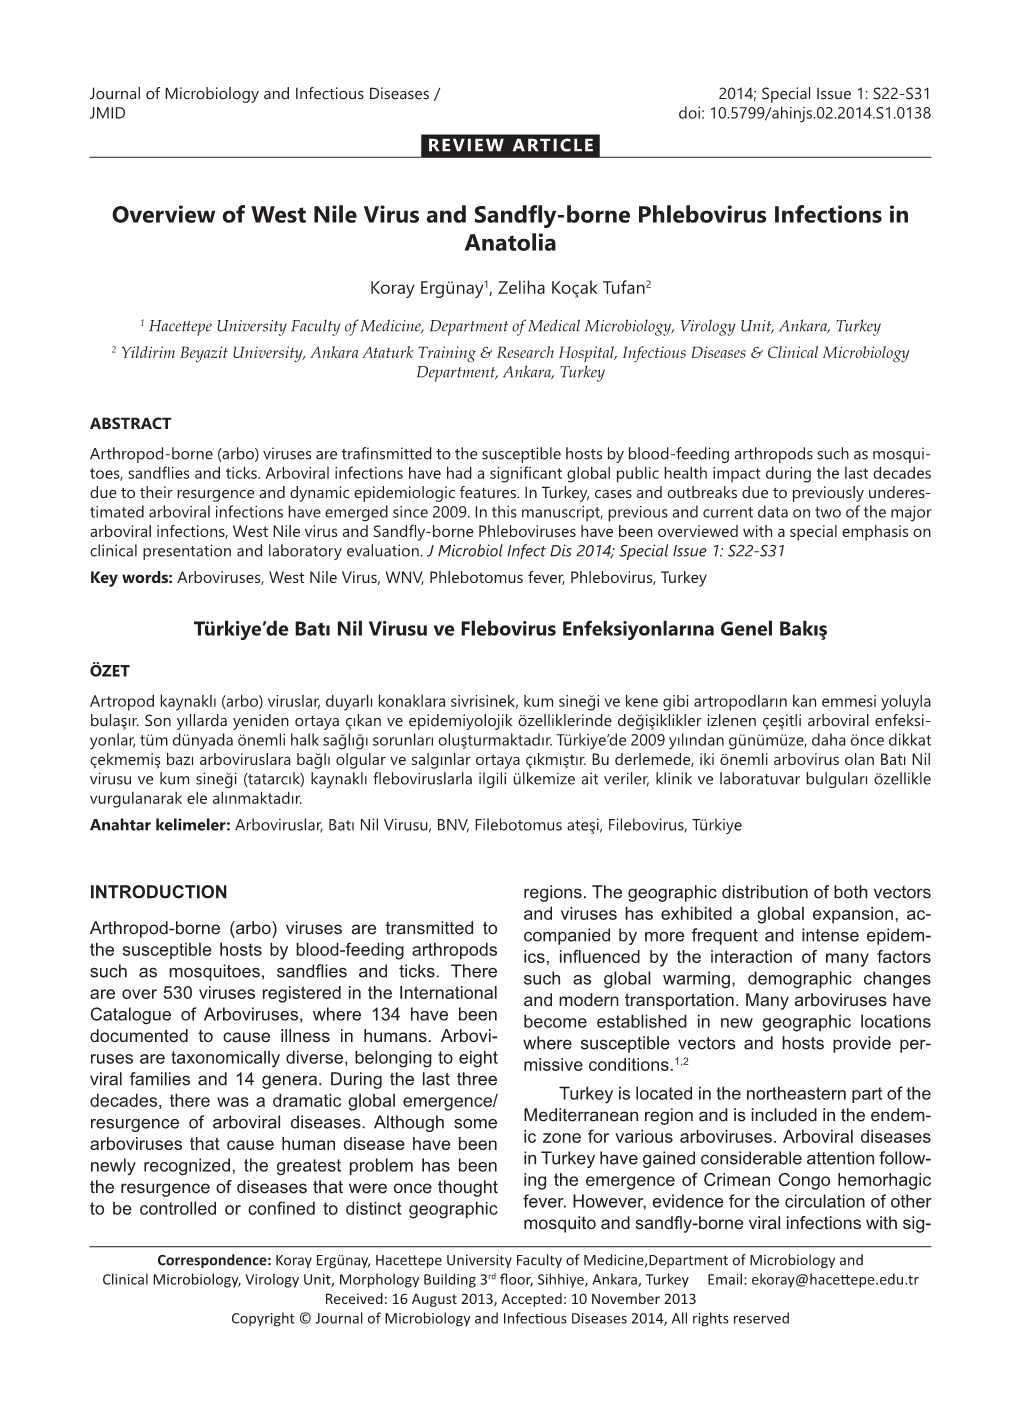 Overview of West Nile Virus and Sandfly-Borne Phlebovirus Infections in Anatolia